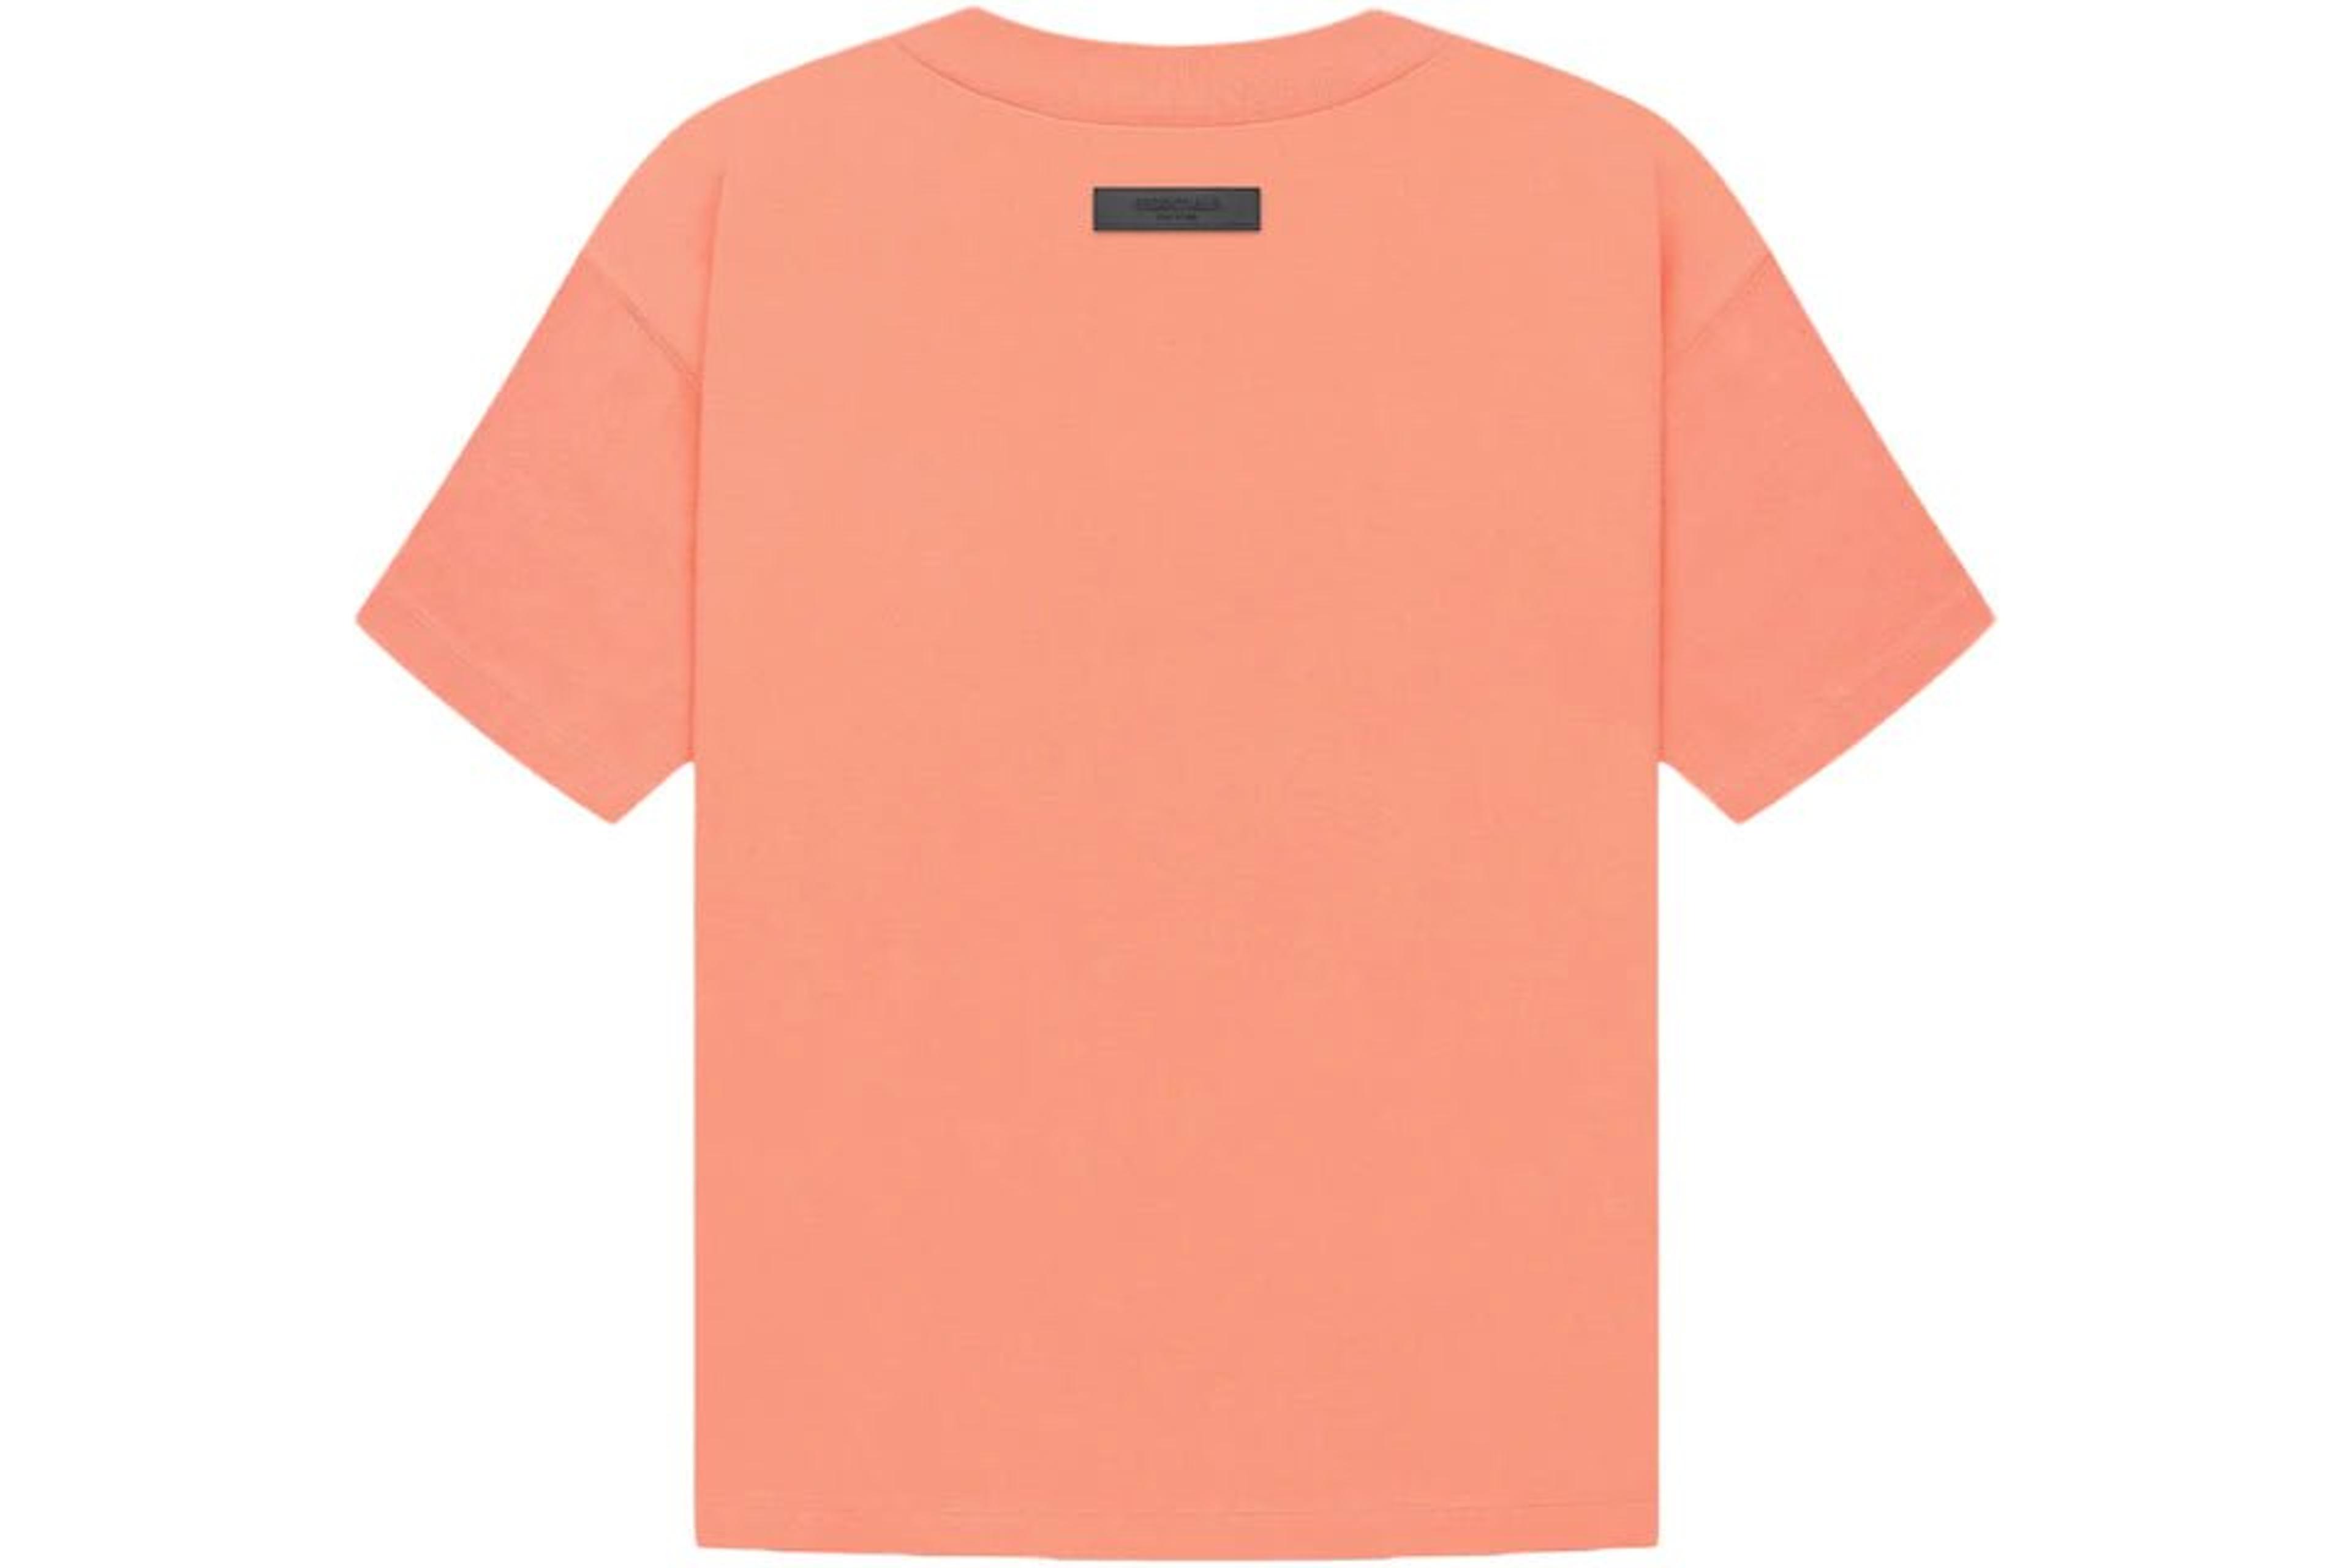 Alternate View 1 of Fear of God Essentials T-shirt Coral